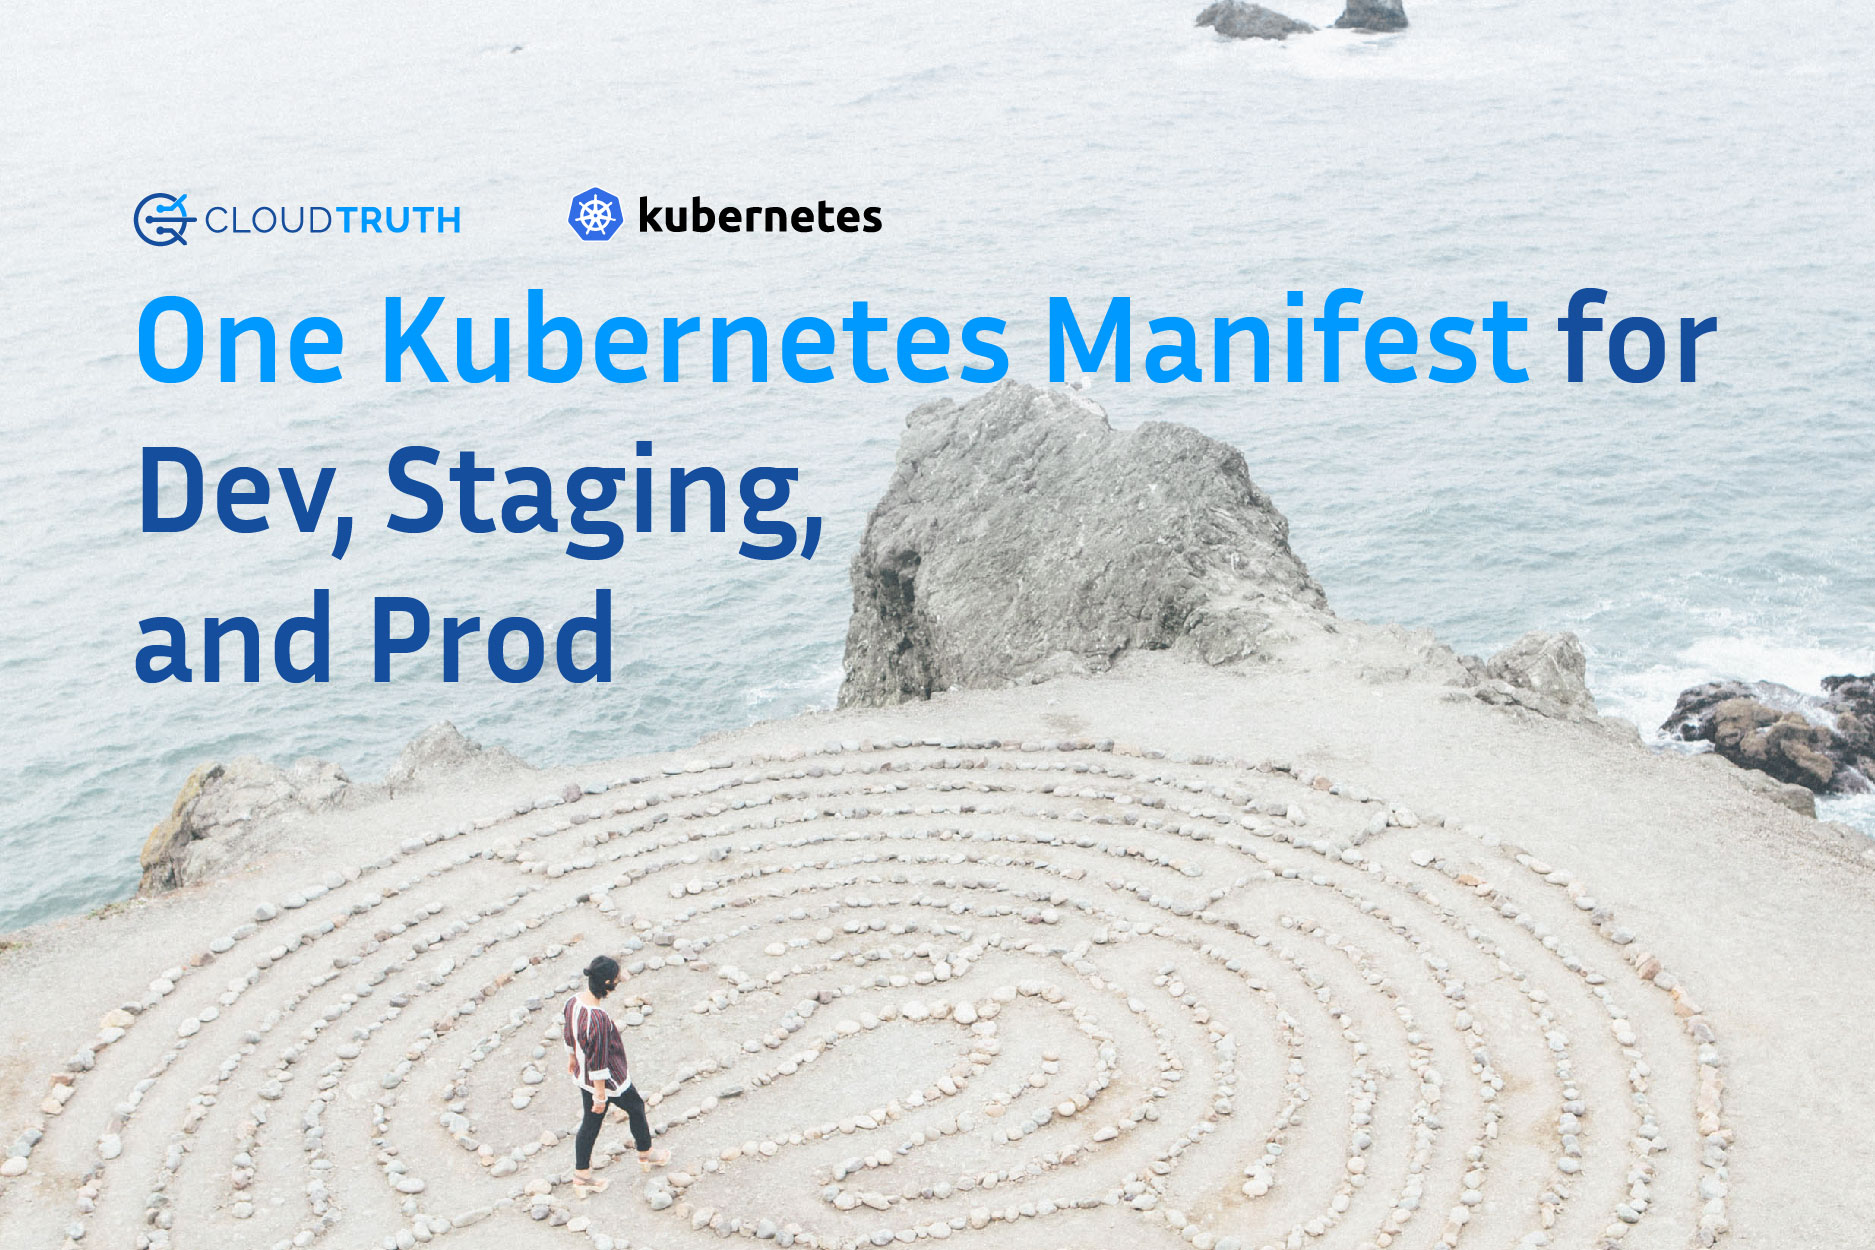 One Kubernetes Manifest for Dev, Staging, and Prod